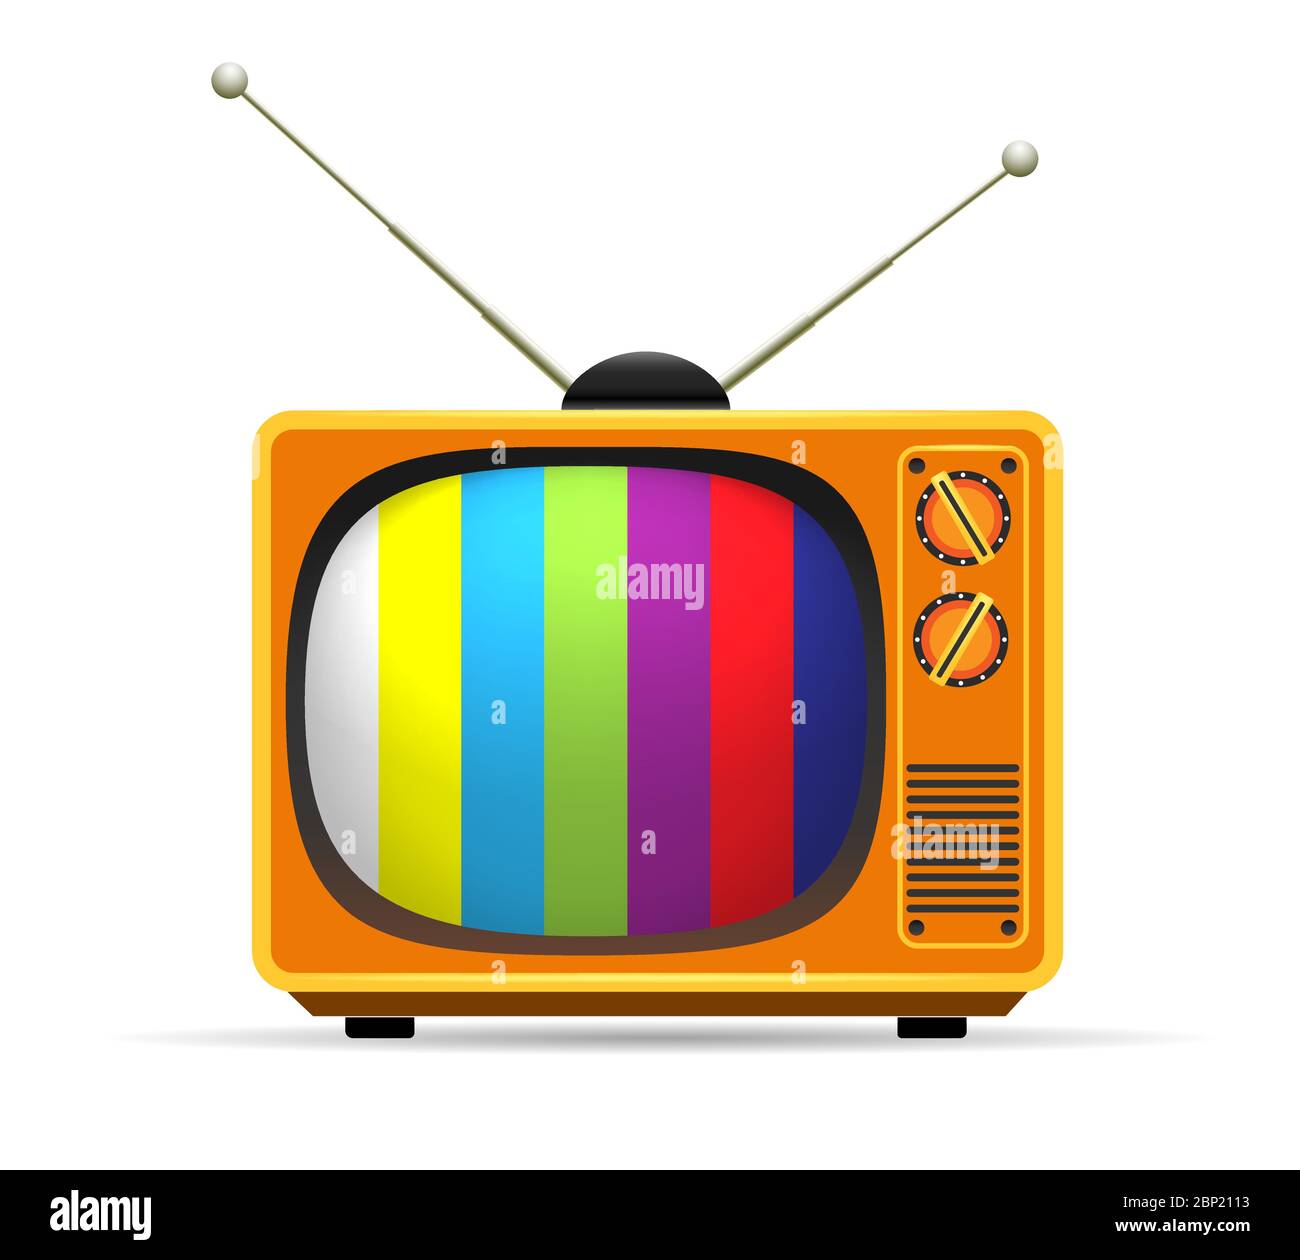 Old vintage colors tv Stock Vector